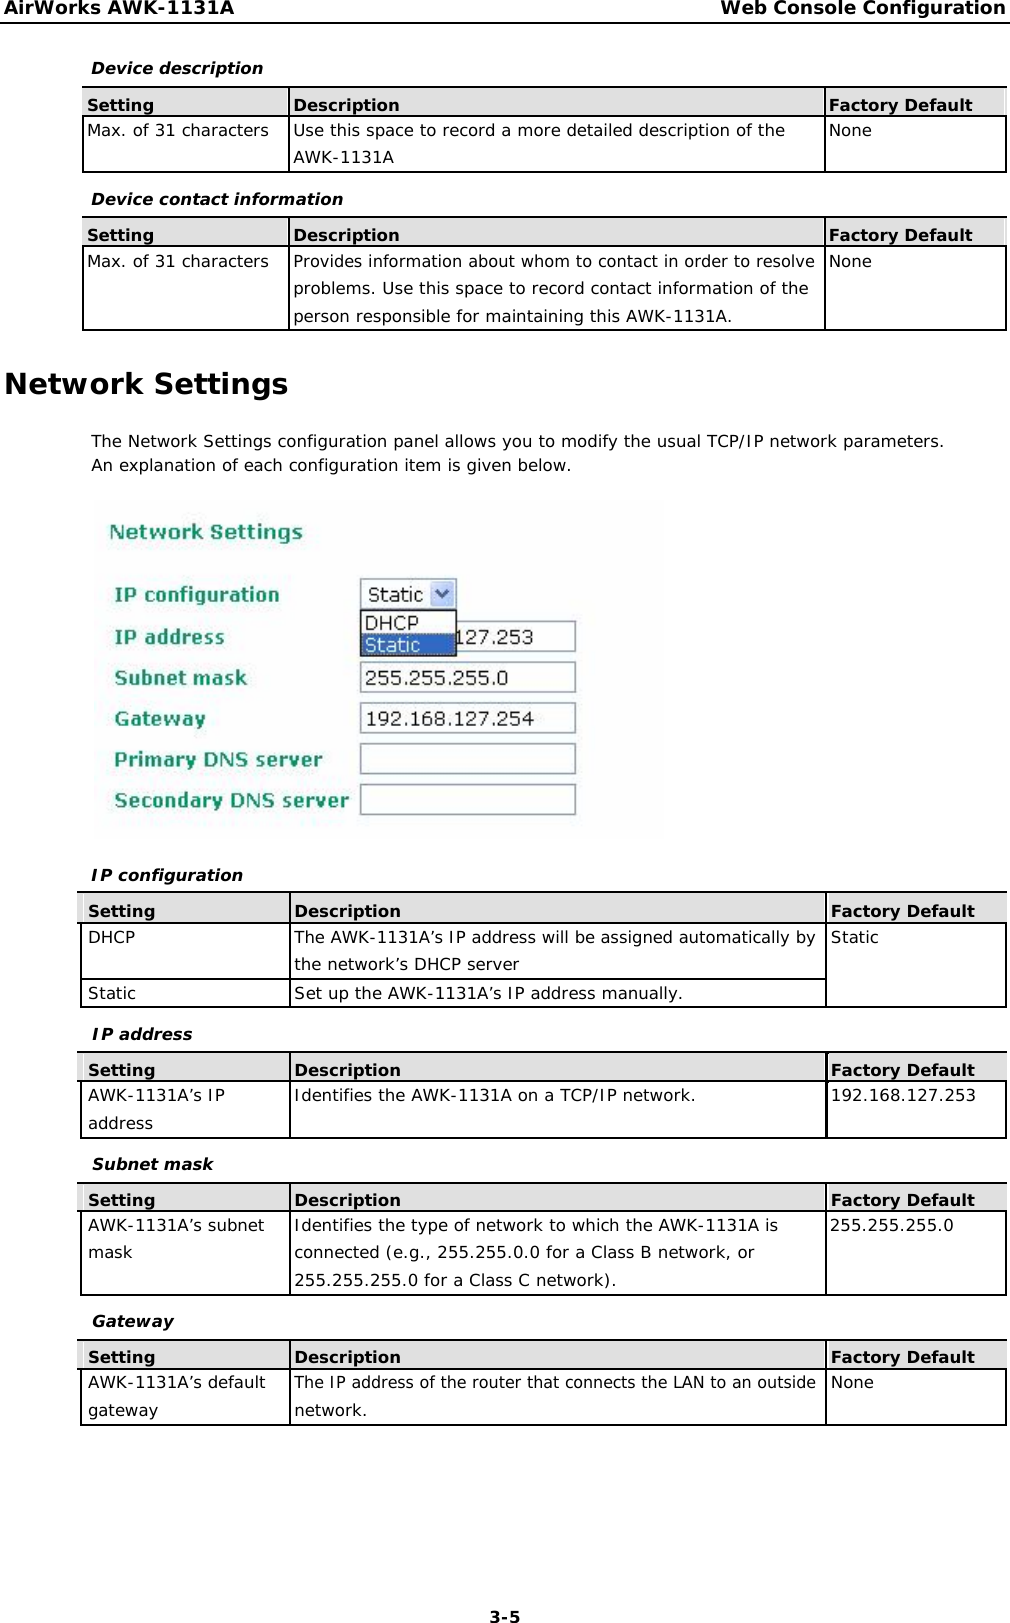 AirWorks AWK-1131A Web Console Configuration          Device description          Setting Description Factory Default Max. of 31 characters Use this space to record a more detailed description of the None    AWK-1131A           Device contact information         Setting Description Factory Default Max. of 31 characters Provides information about whom to contact in order to resolve None    problems. Use this space to record contact information of the     person responsible for maintaining this AWK-1131A.            Network Settings  The Network Settings configuration panel allows you to modify the usual TCP/IP network parameters. An explanation of each configuration item is given below.                   IP configuration    Setting Description  Factory Default   DHCP The AWK-1131A’s IP address will be assigned automatically by  Static     the network’s DHCP server             Static Set up the AWK-1131A’s IP address manually.             IP address             Setting Description  Factory Default   AWK-1131A’s IP Identifies the AWK-1131A on a TCP/IP network.  192.168.127.253  address              Subnet mask             Setting Description  Factory Default   AWK-1131A’s subnet Identifies the type of network to which the AWK-1131A is 255.255.255.0  mask connected (e.g., 255.255.0.0 for a Class B network, or       255.255.255.0 for a Class C network).             Gateway             Setting Description  Factory Default   AWK-1131A’s defaultThe IP address of the router that connects the LAN to an outside  None   gateway network.                  3-5 